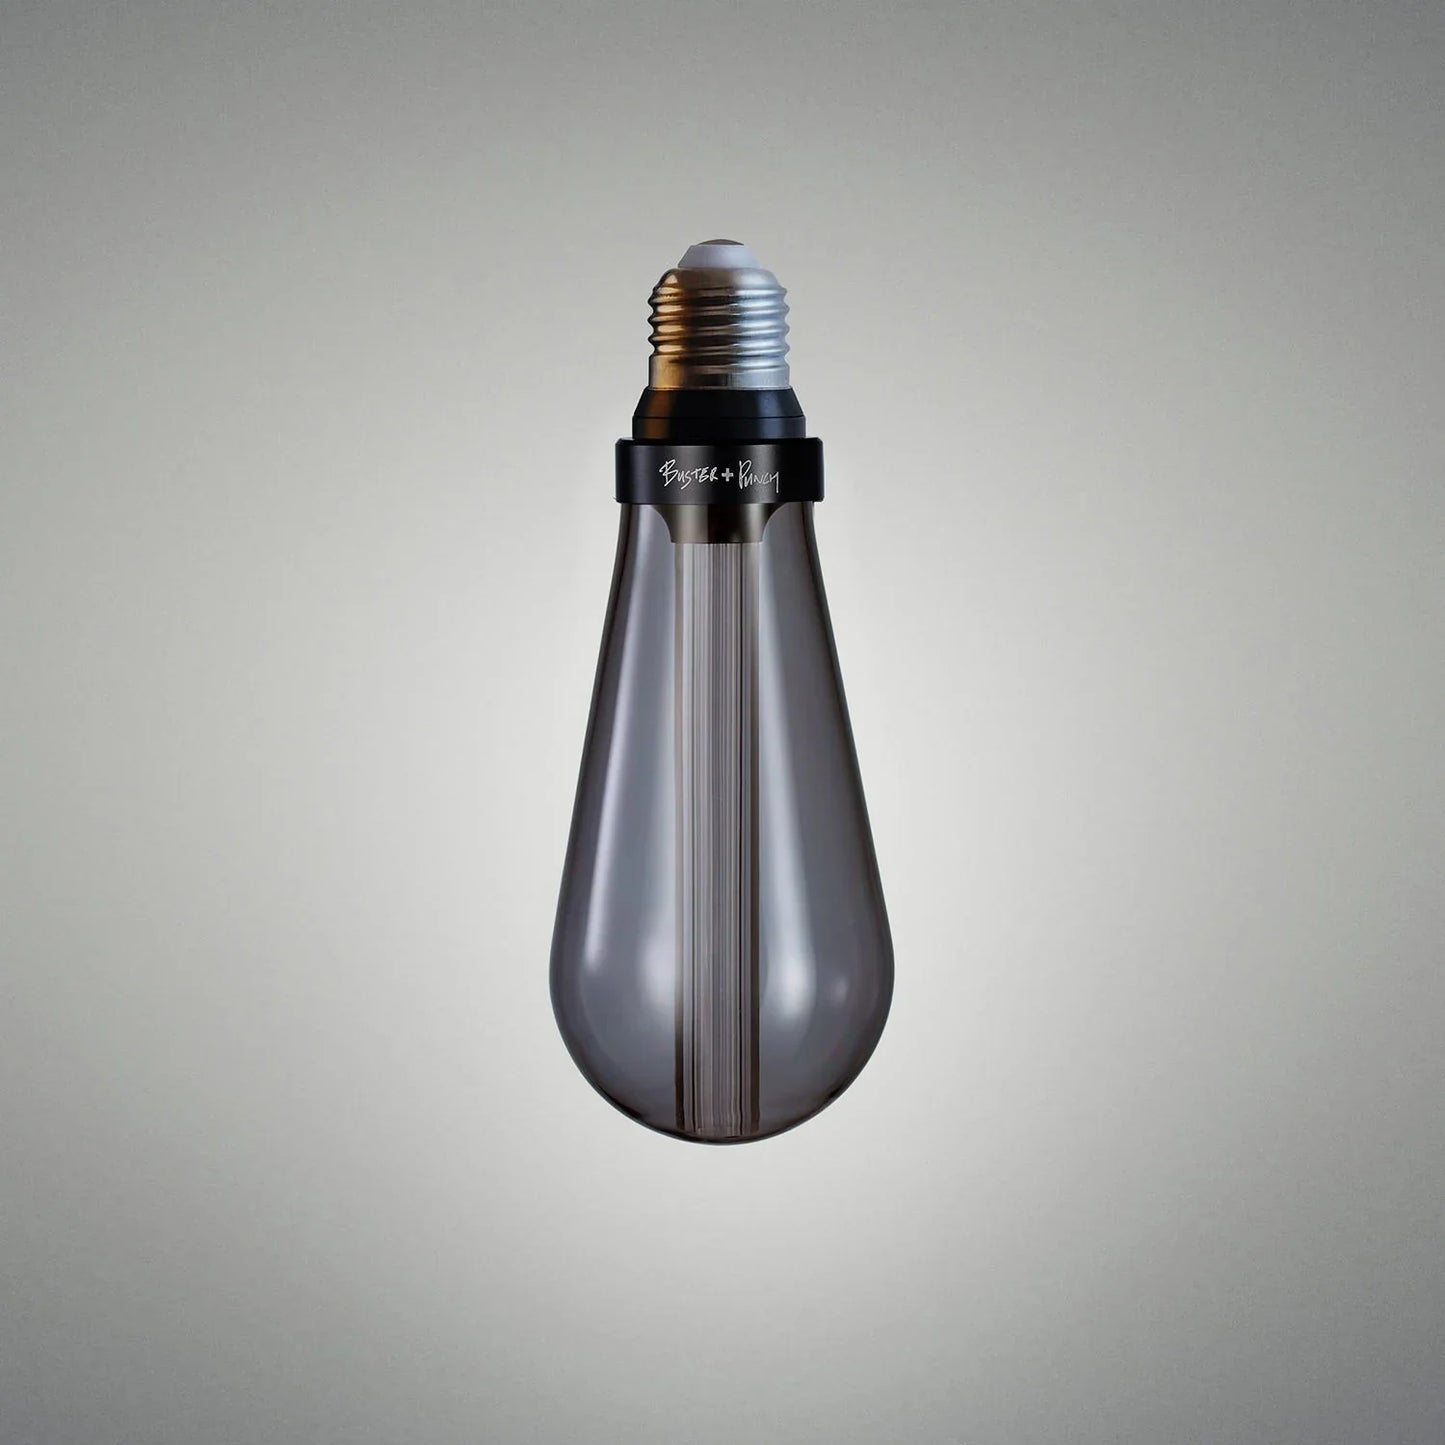 Buster Bulb smoked bronze grey background 